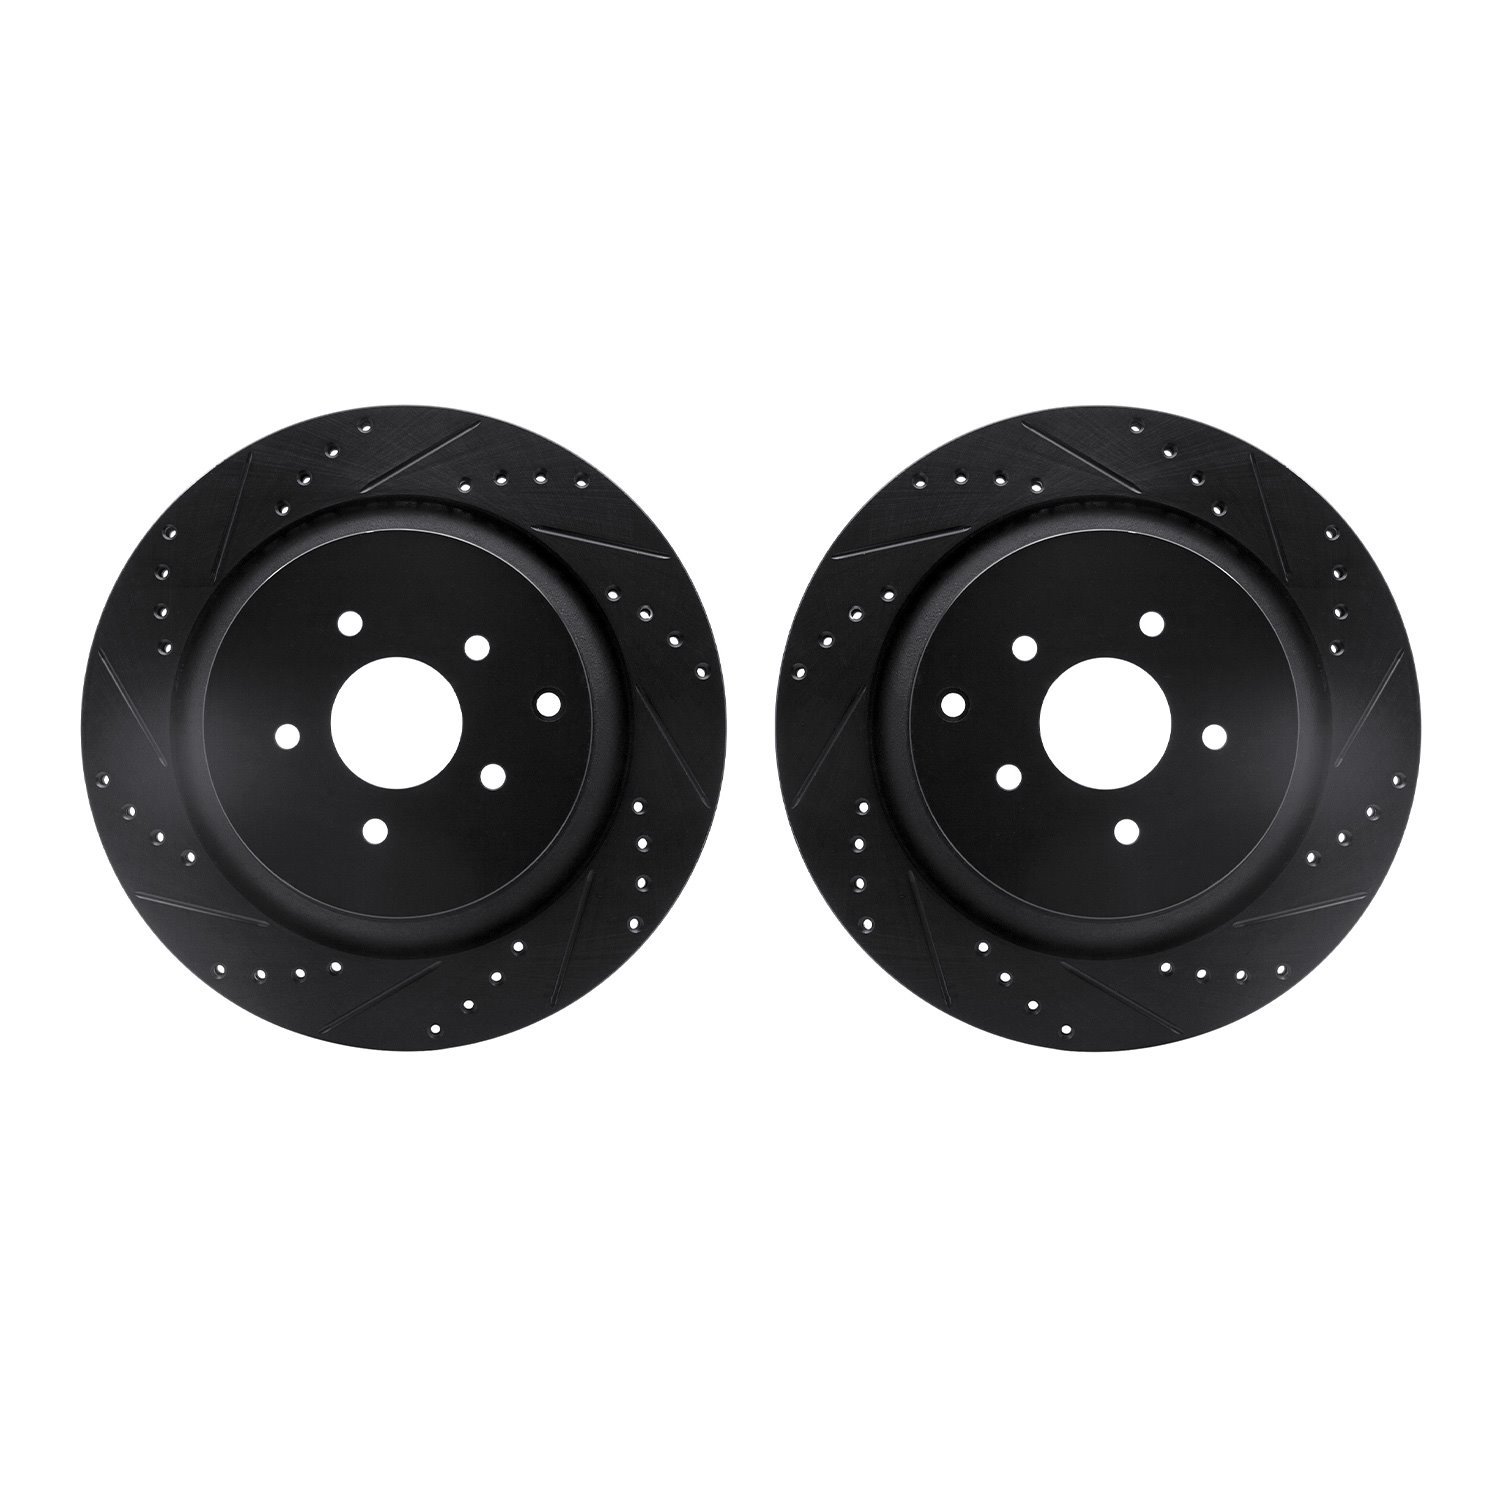 8002-68010 Drilled/Slotted Brake Rotors [Black], Fits Select Infiniti/Nissan, Position: Rear